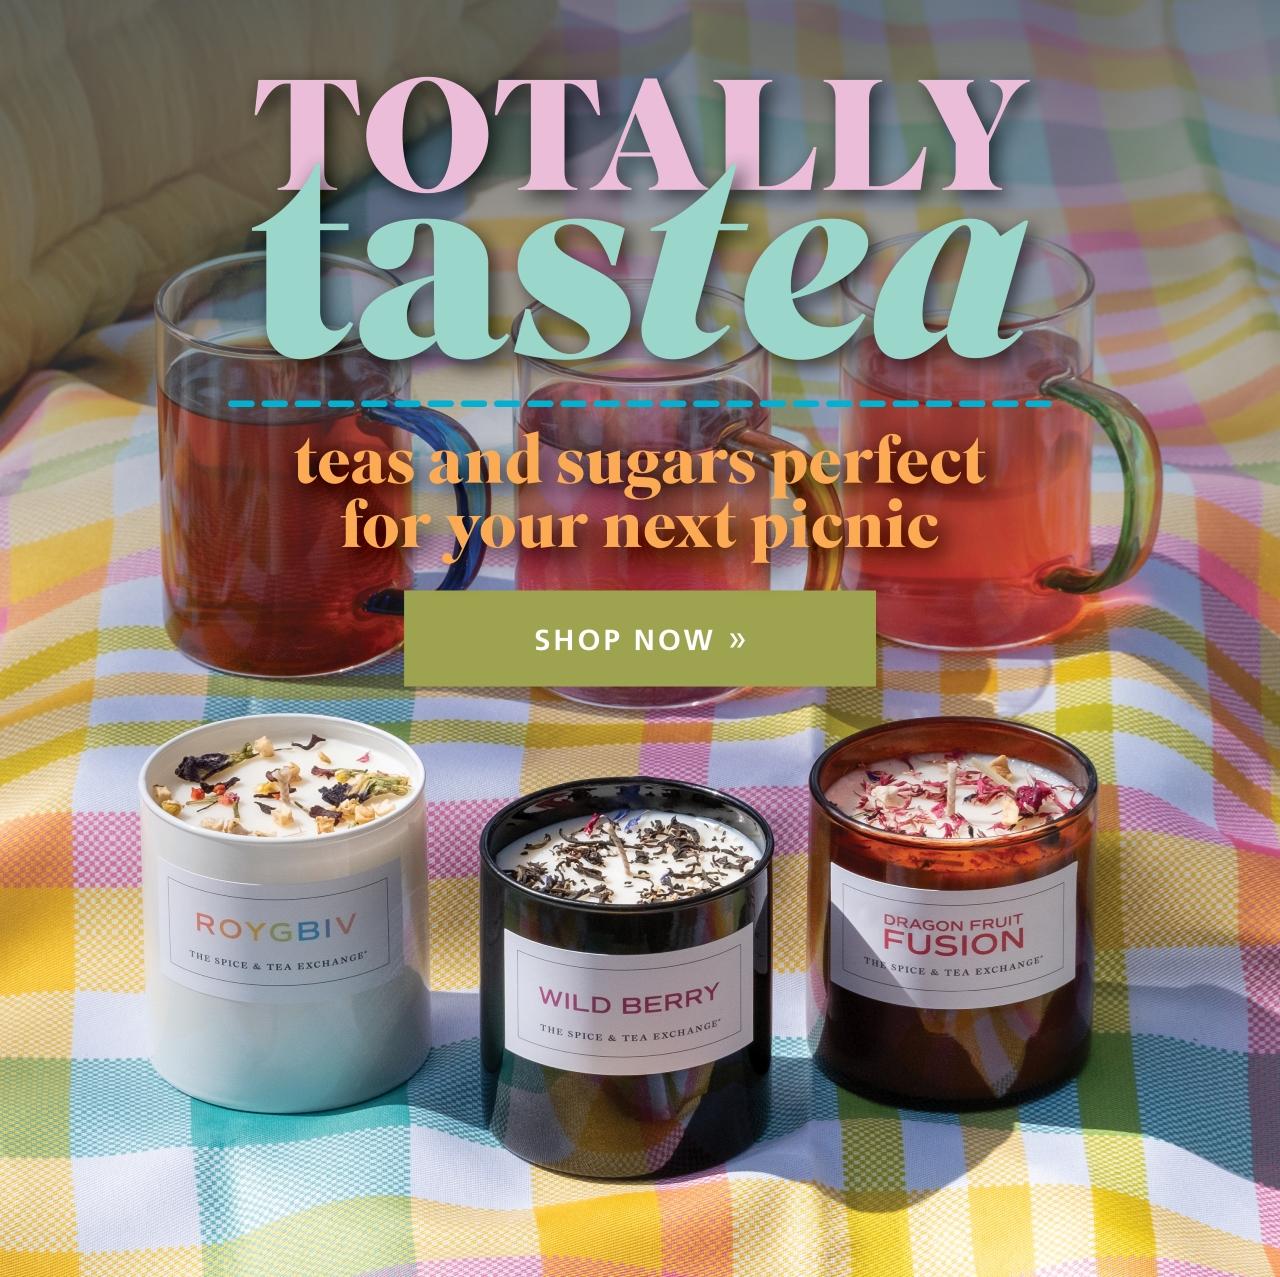 Slide 1: TOTALLY tastea - teas and sugars perfect for your next picnic - Shop Now